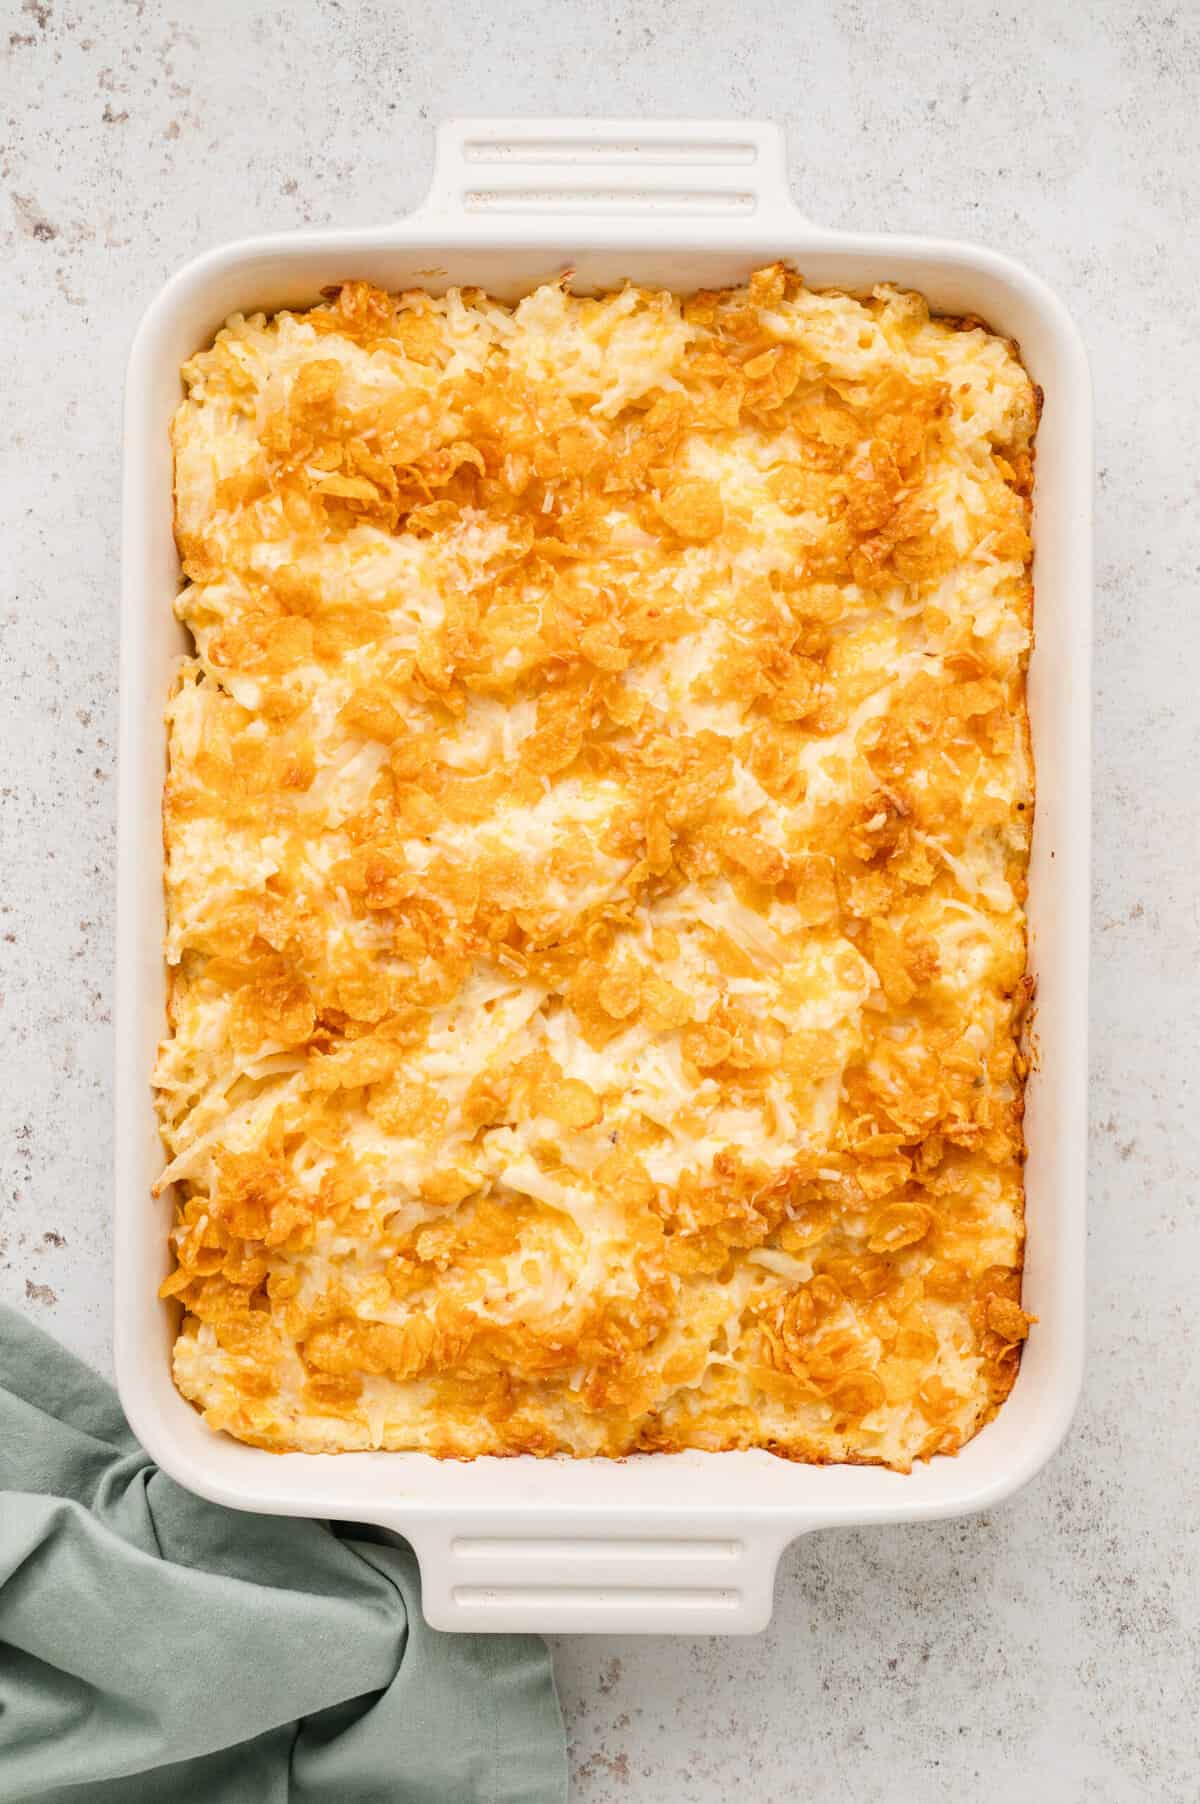 Cheesy Potatoes recipe hot out of the oven in a baking dish